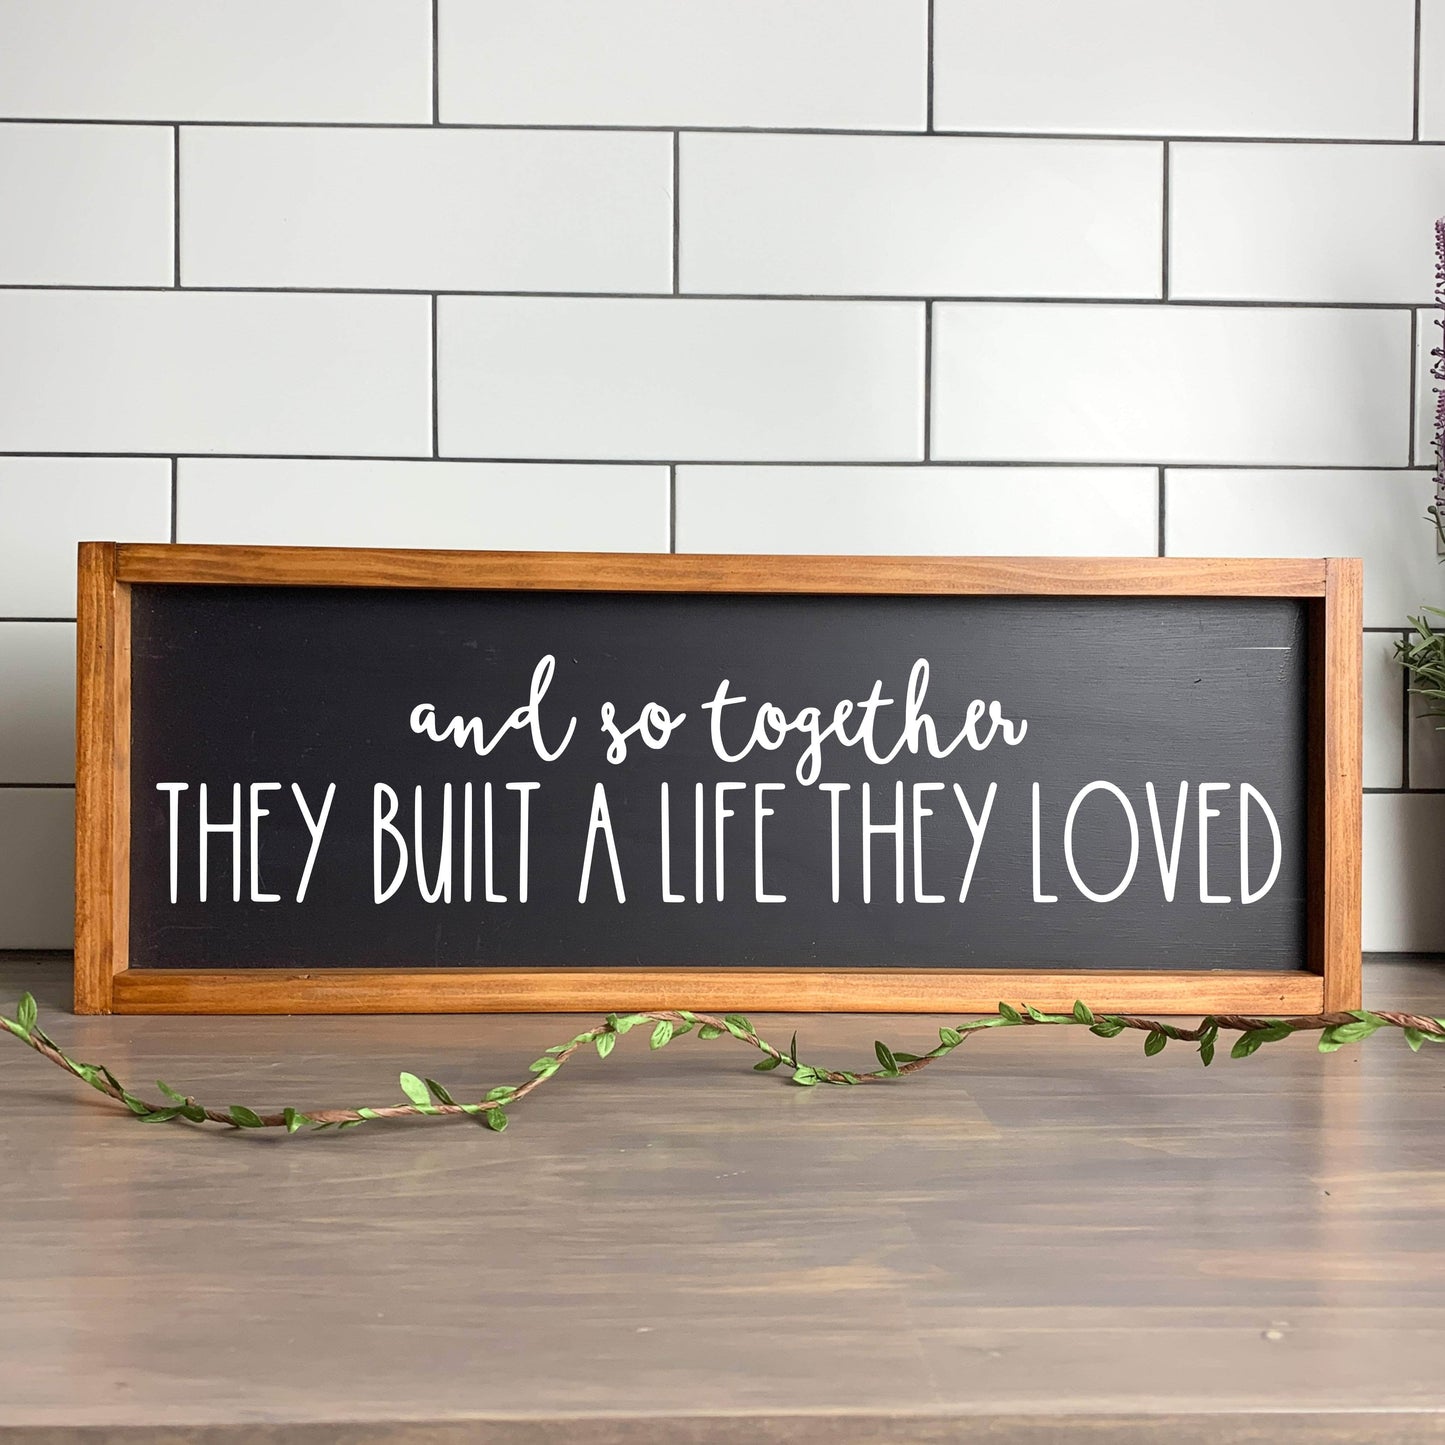 And so together they built a life they loved framed wood sign, farmhouse sign, rustic decor, home decor